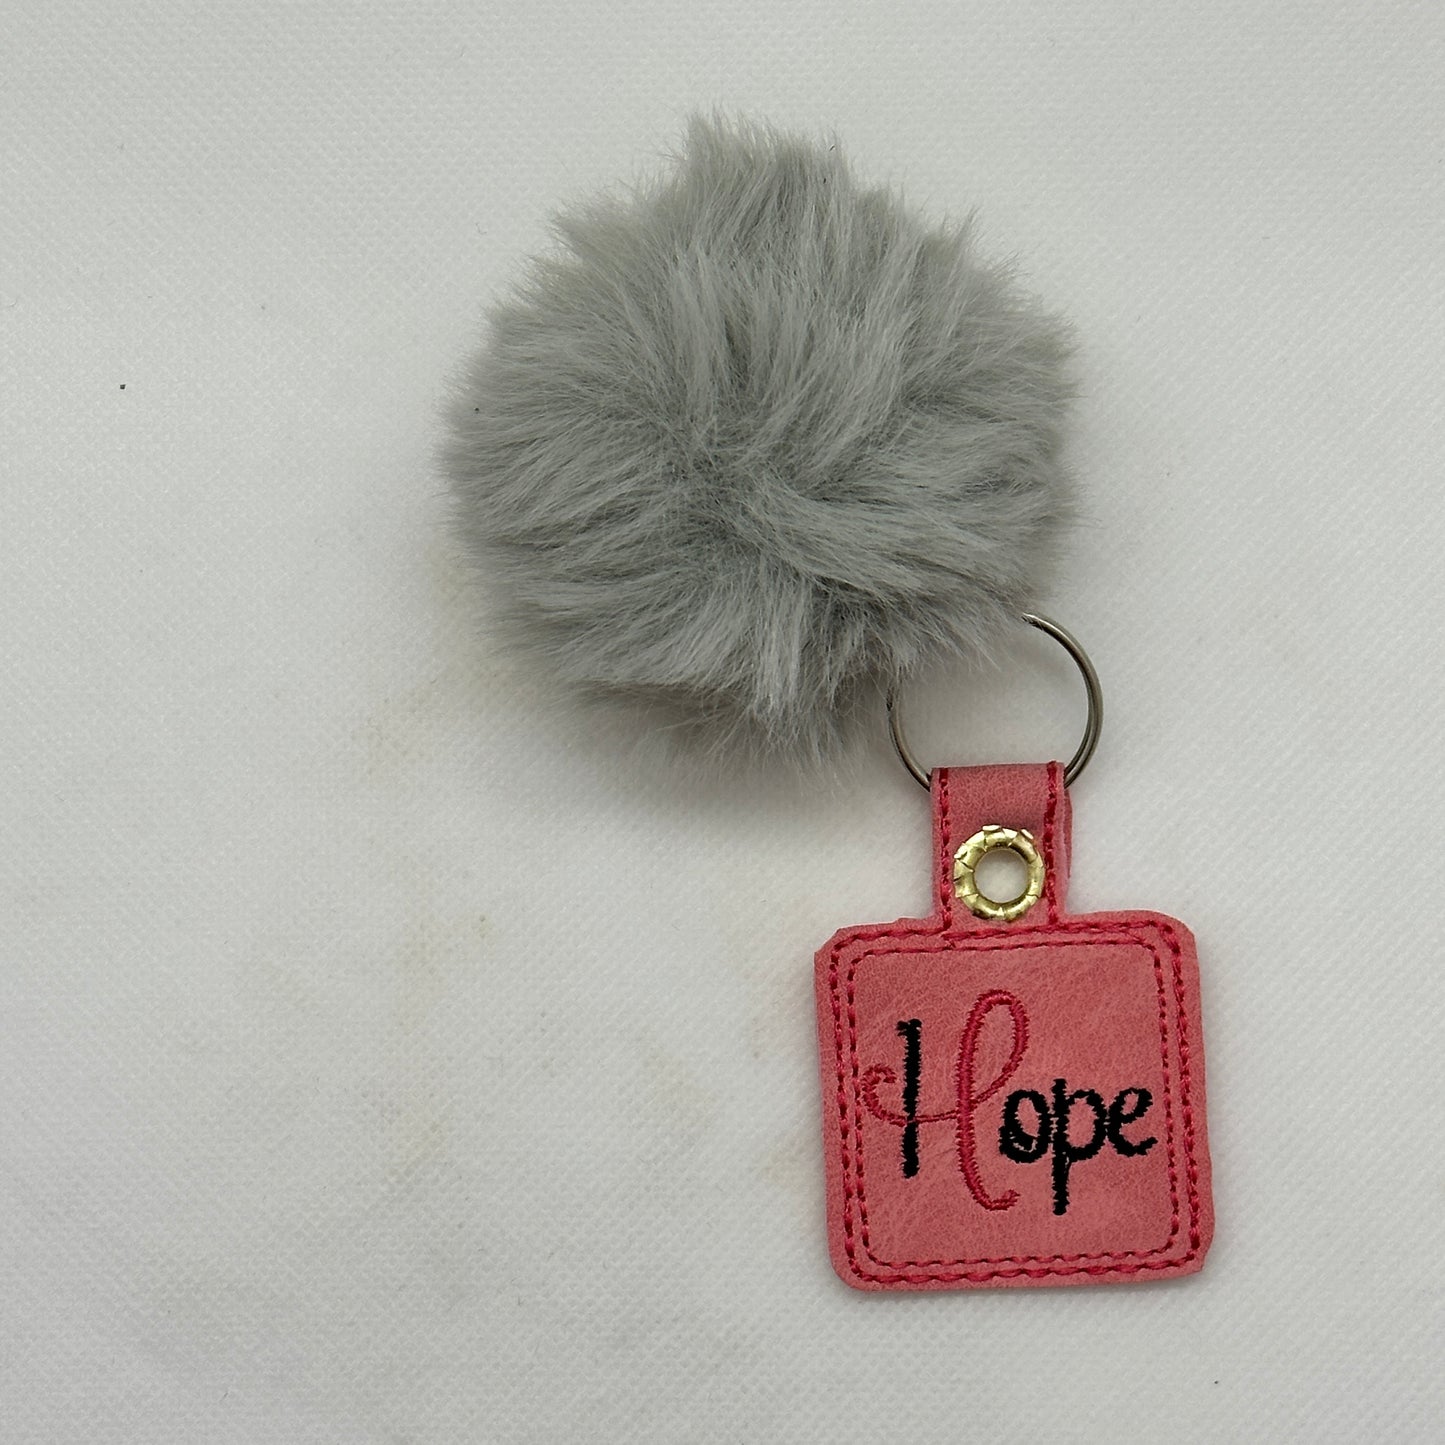 Breast cancer awareness key chain